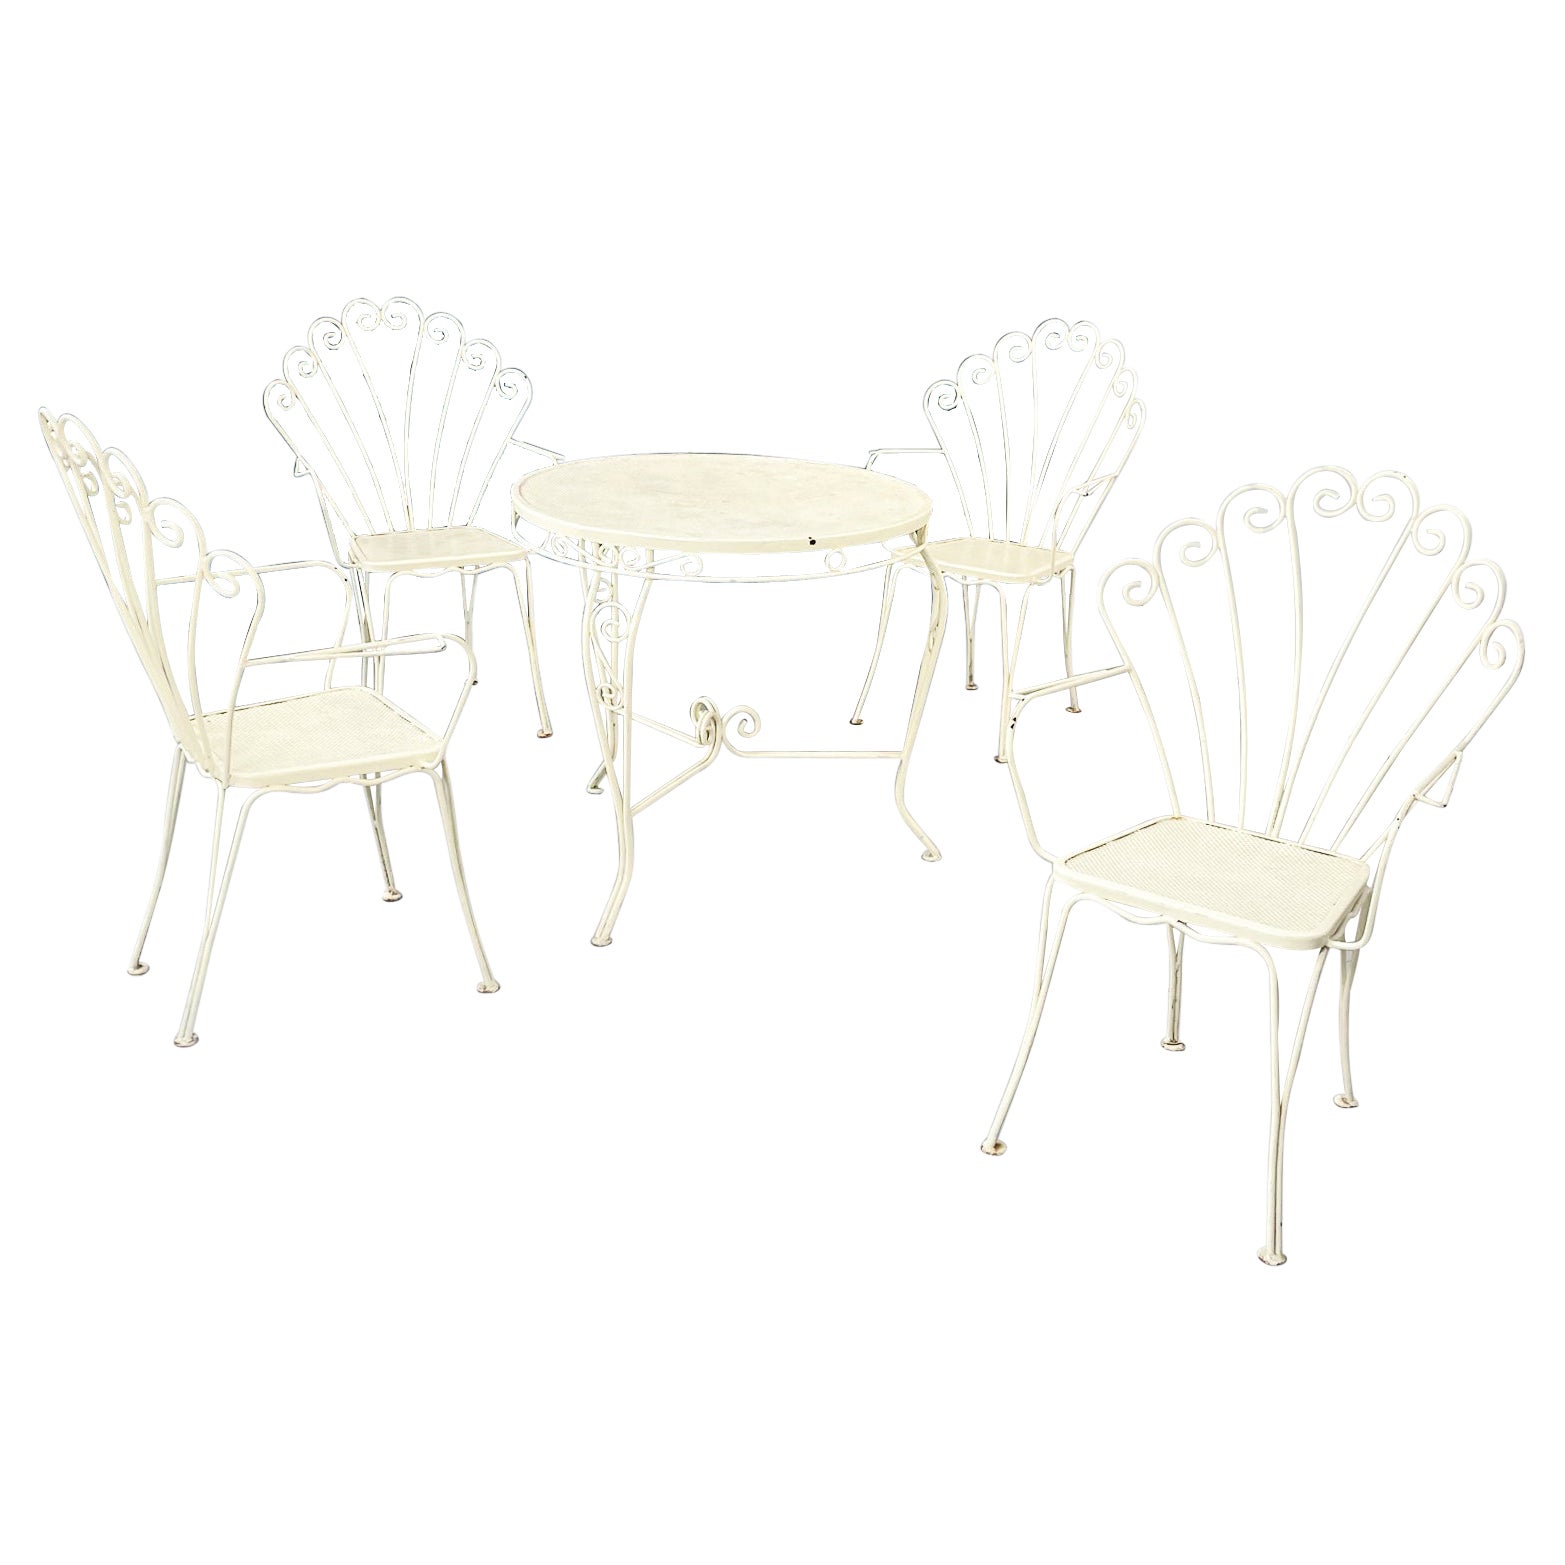 Italian Mid-Century Modern Garden Chairs and Table in White Wrought Iron, 1960s For Sale